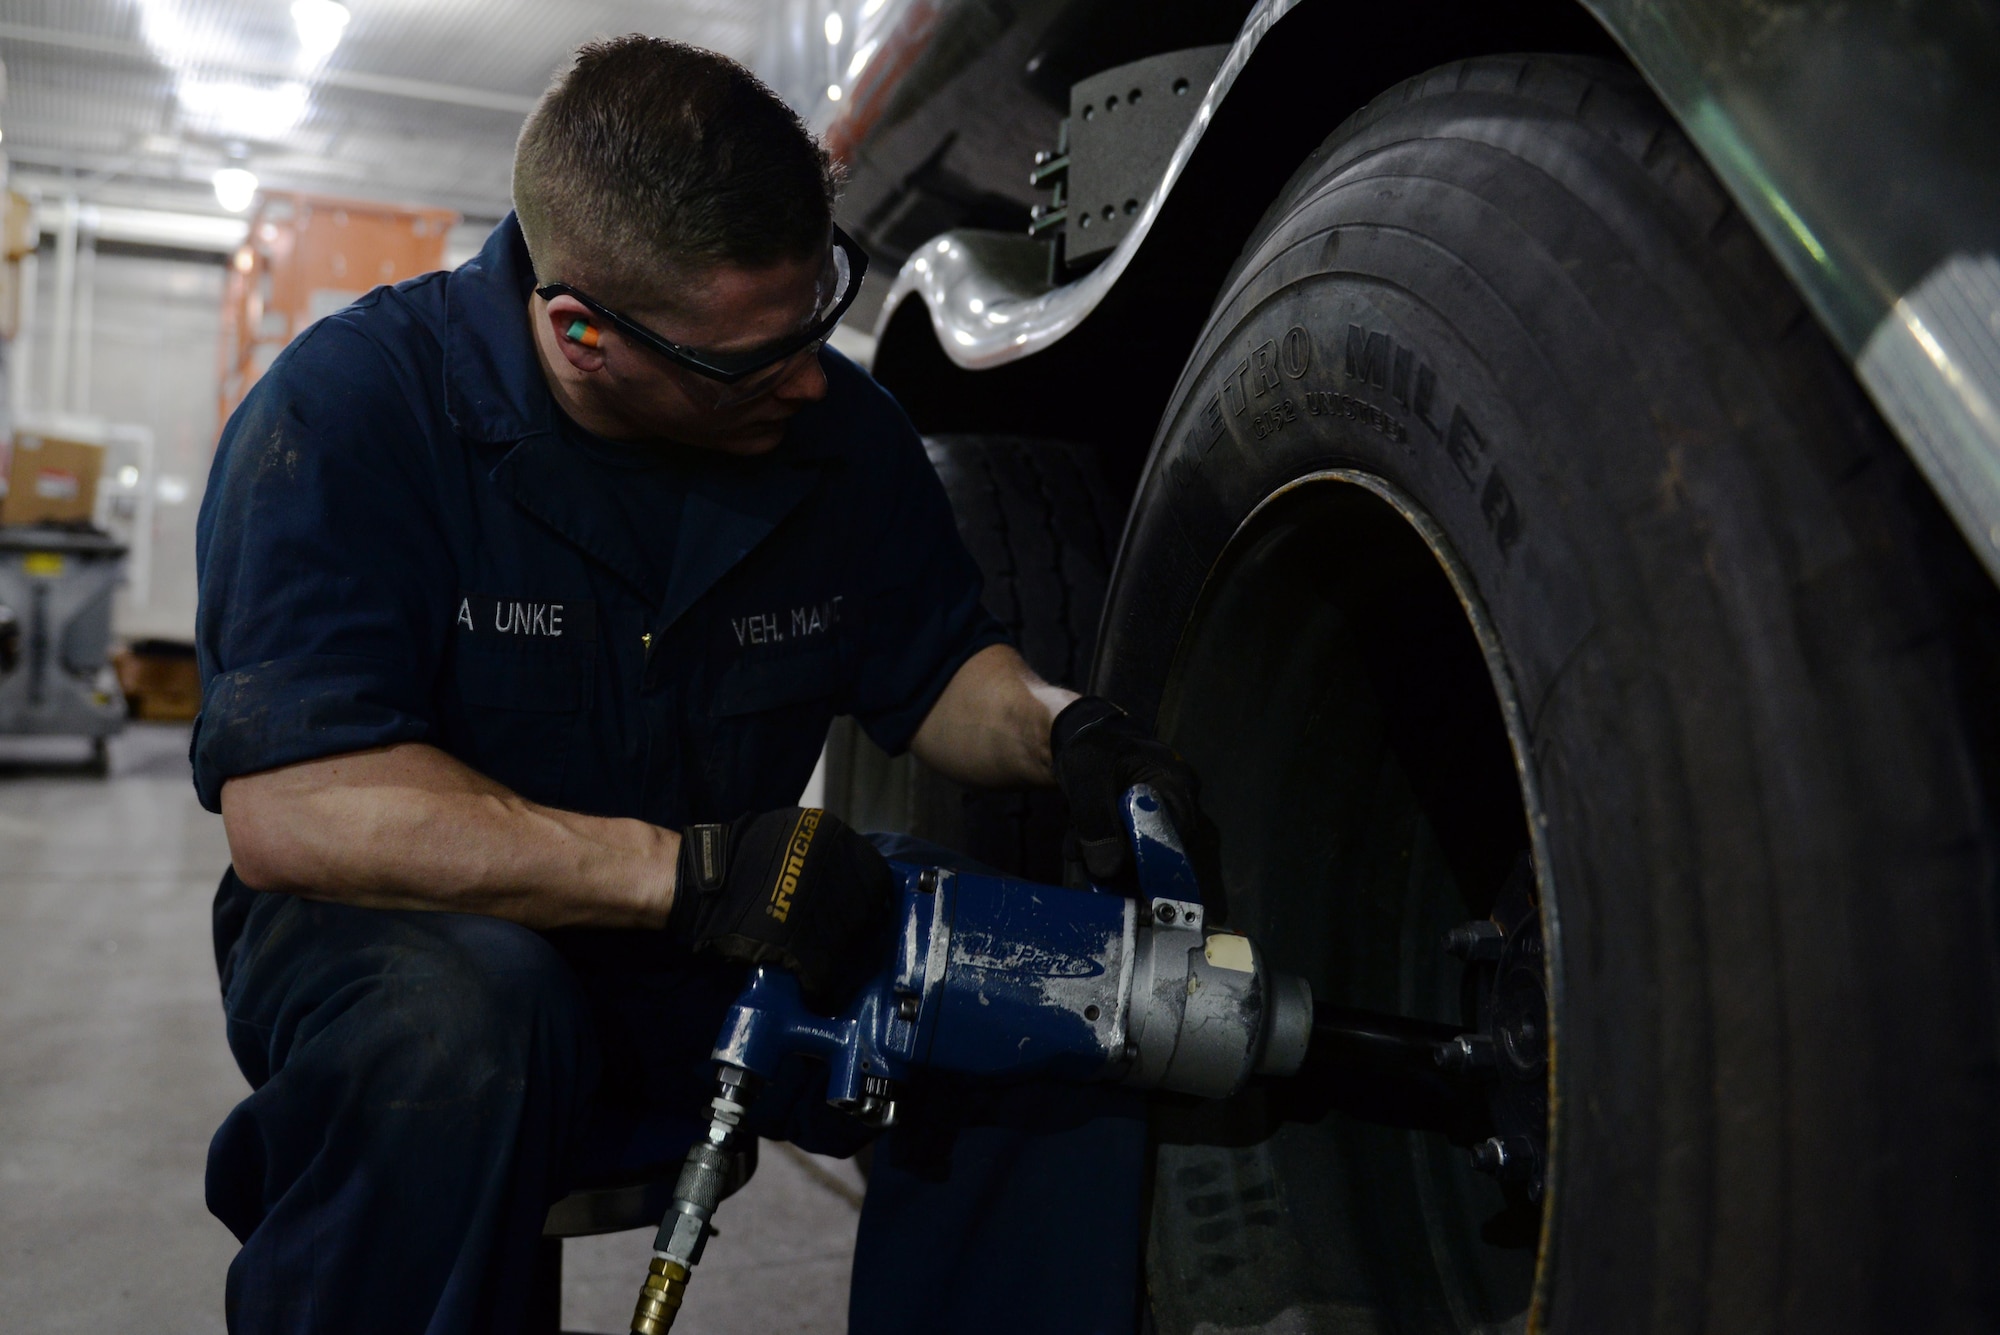 Senior Airman Samuel Unke, a mission general vehicle equipment maintenance journeymen with the 673d Logistics Readiness Squadron Vehicle Maintenance, Refueling Maintenance shop, torques the lug nuts on an R-11 after a tire replacement, Jan. 26, 2018, at Joint Base Elmendorf-Richardson, Alaska. The Refueling Maintenance shop repairs and services all refueling equipment such as the R-11 and R-12 at JBER.